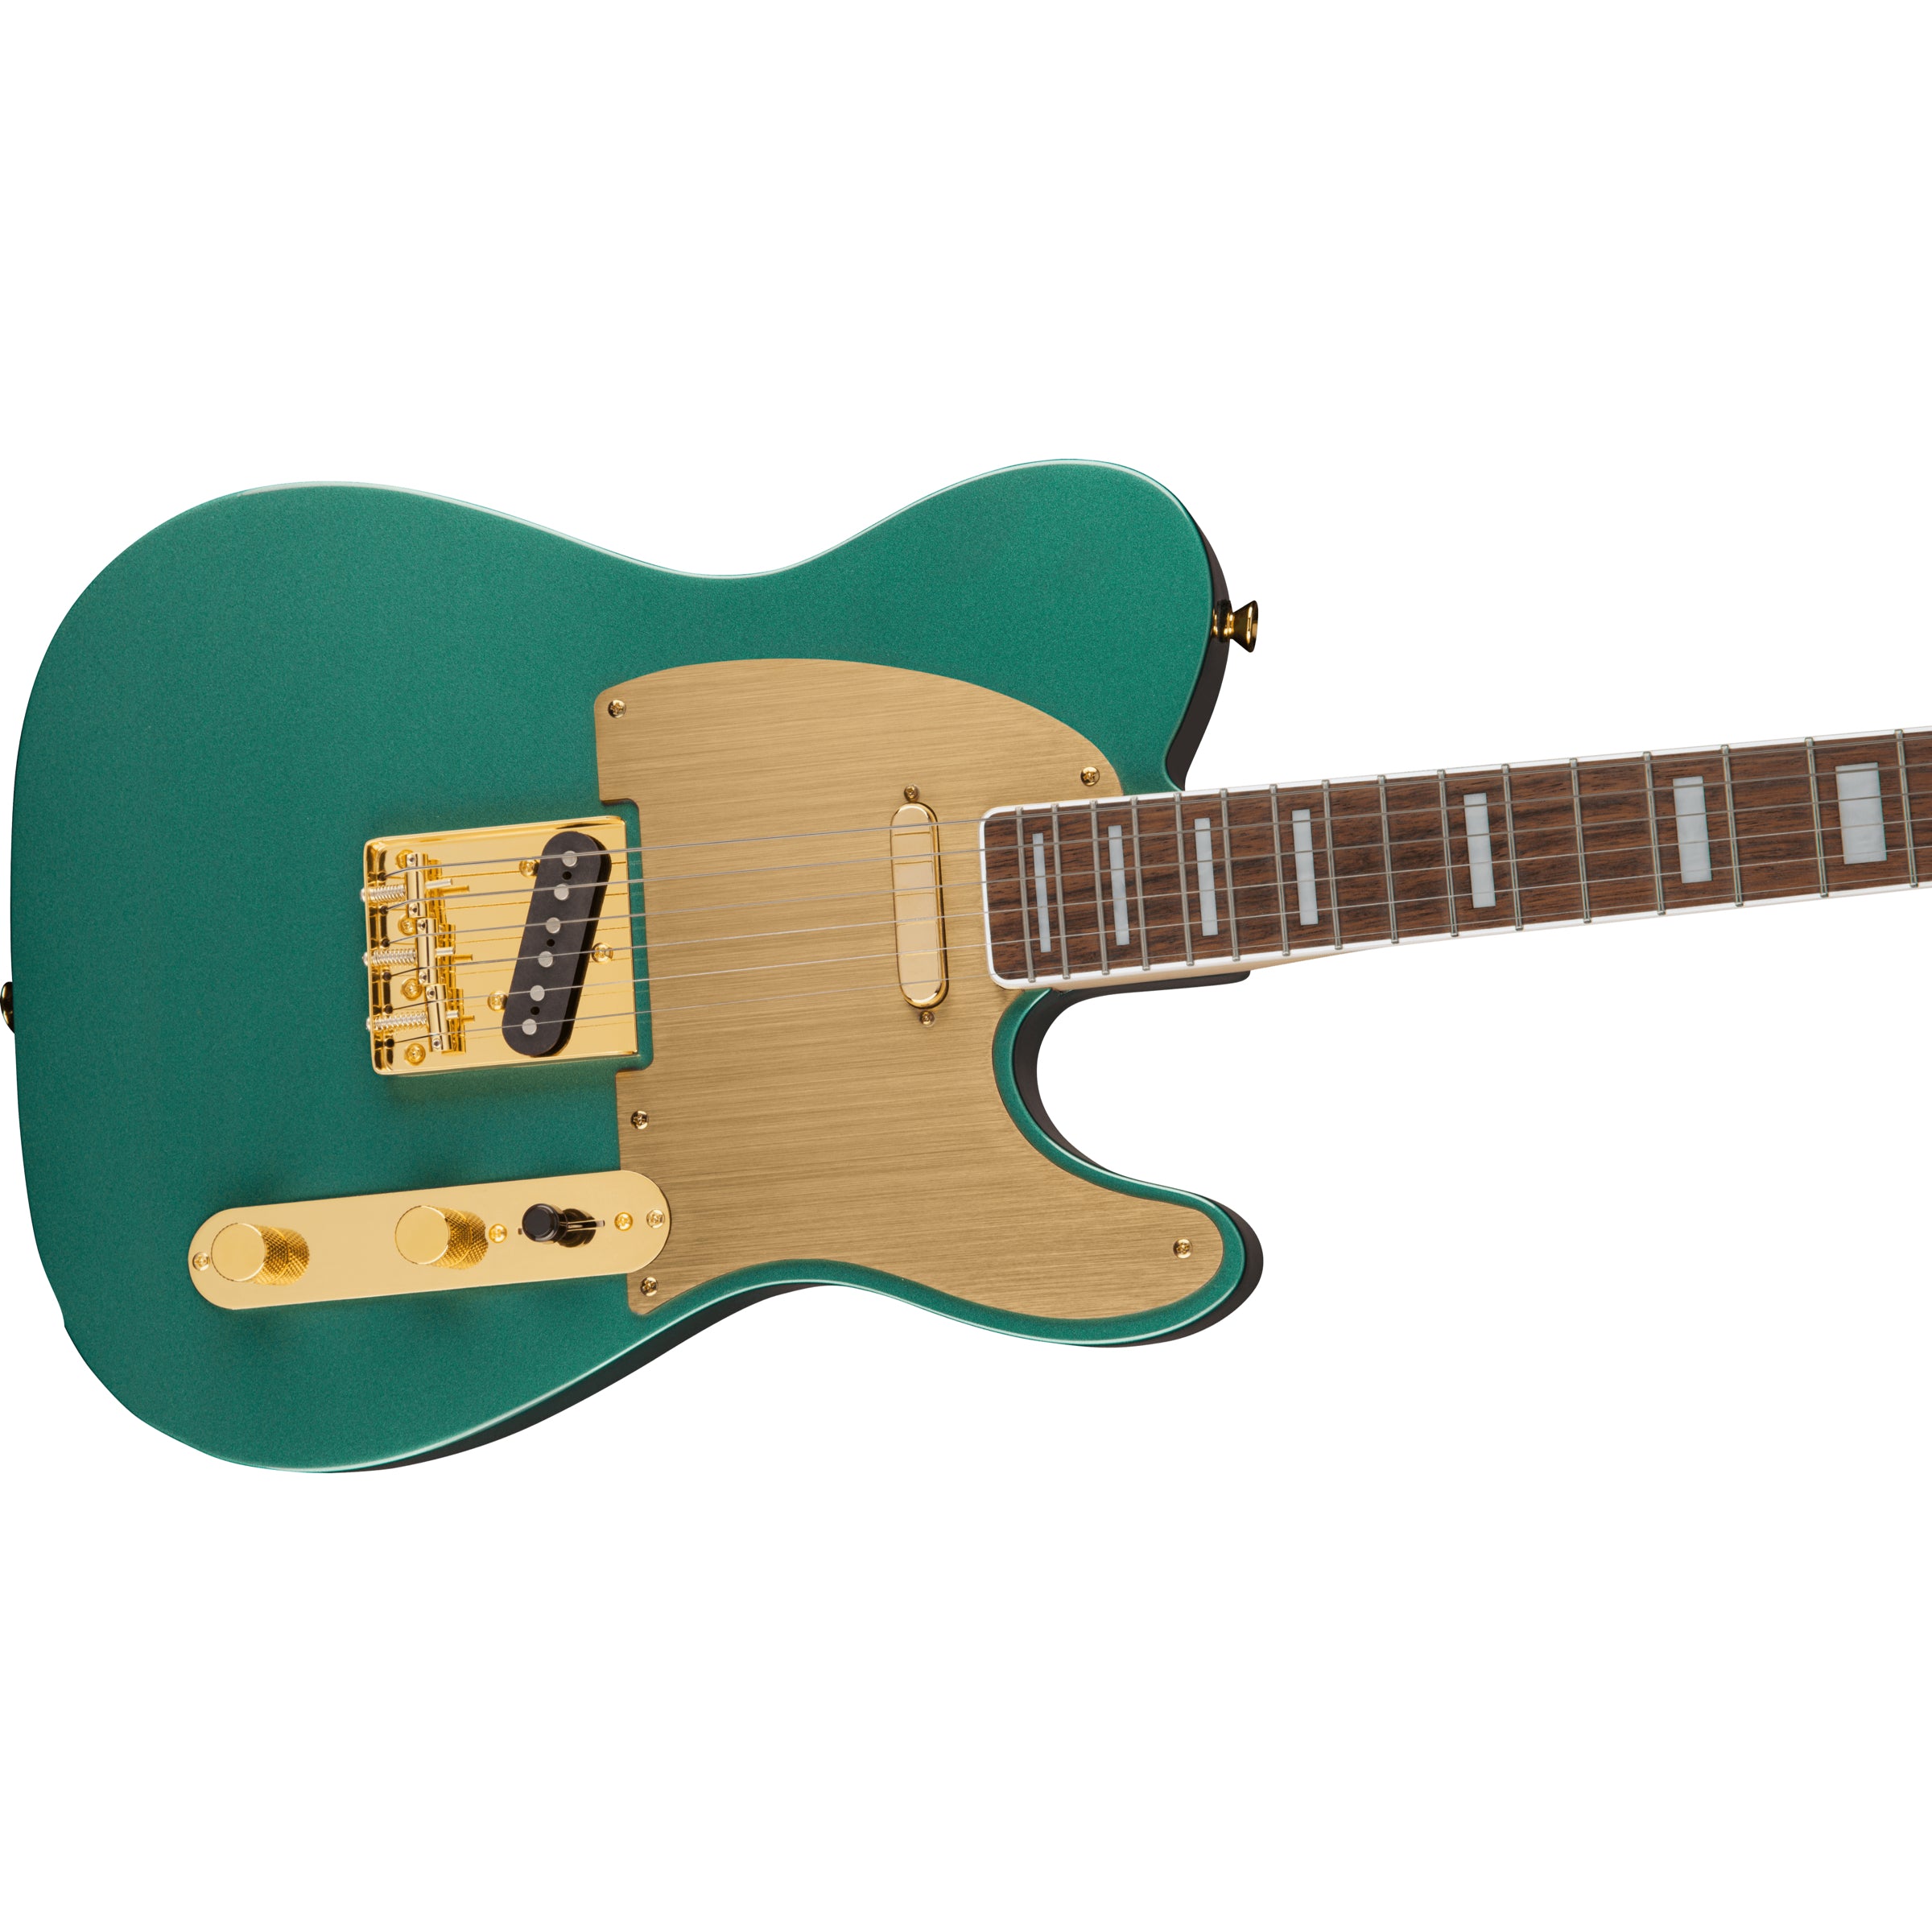 Squier 40th Anniversary Telecaster, Gold Edition, Sherwood Green Metallic